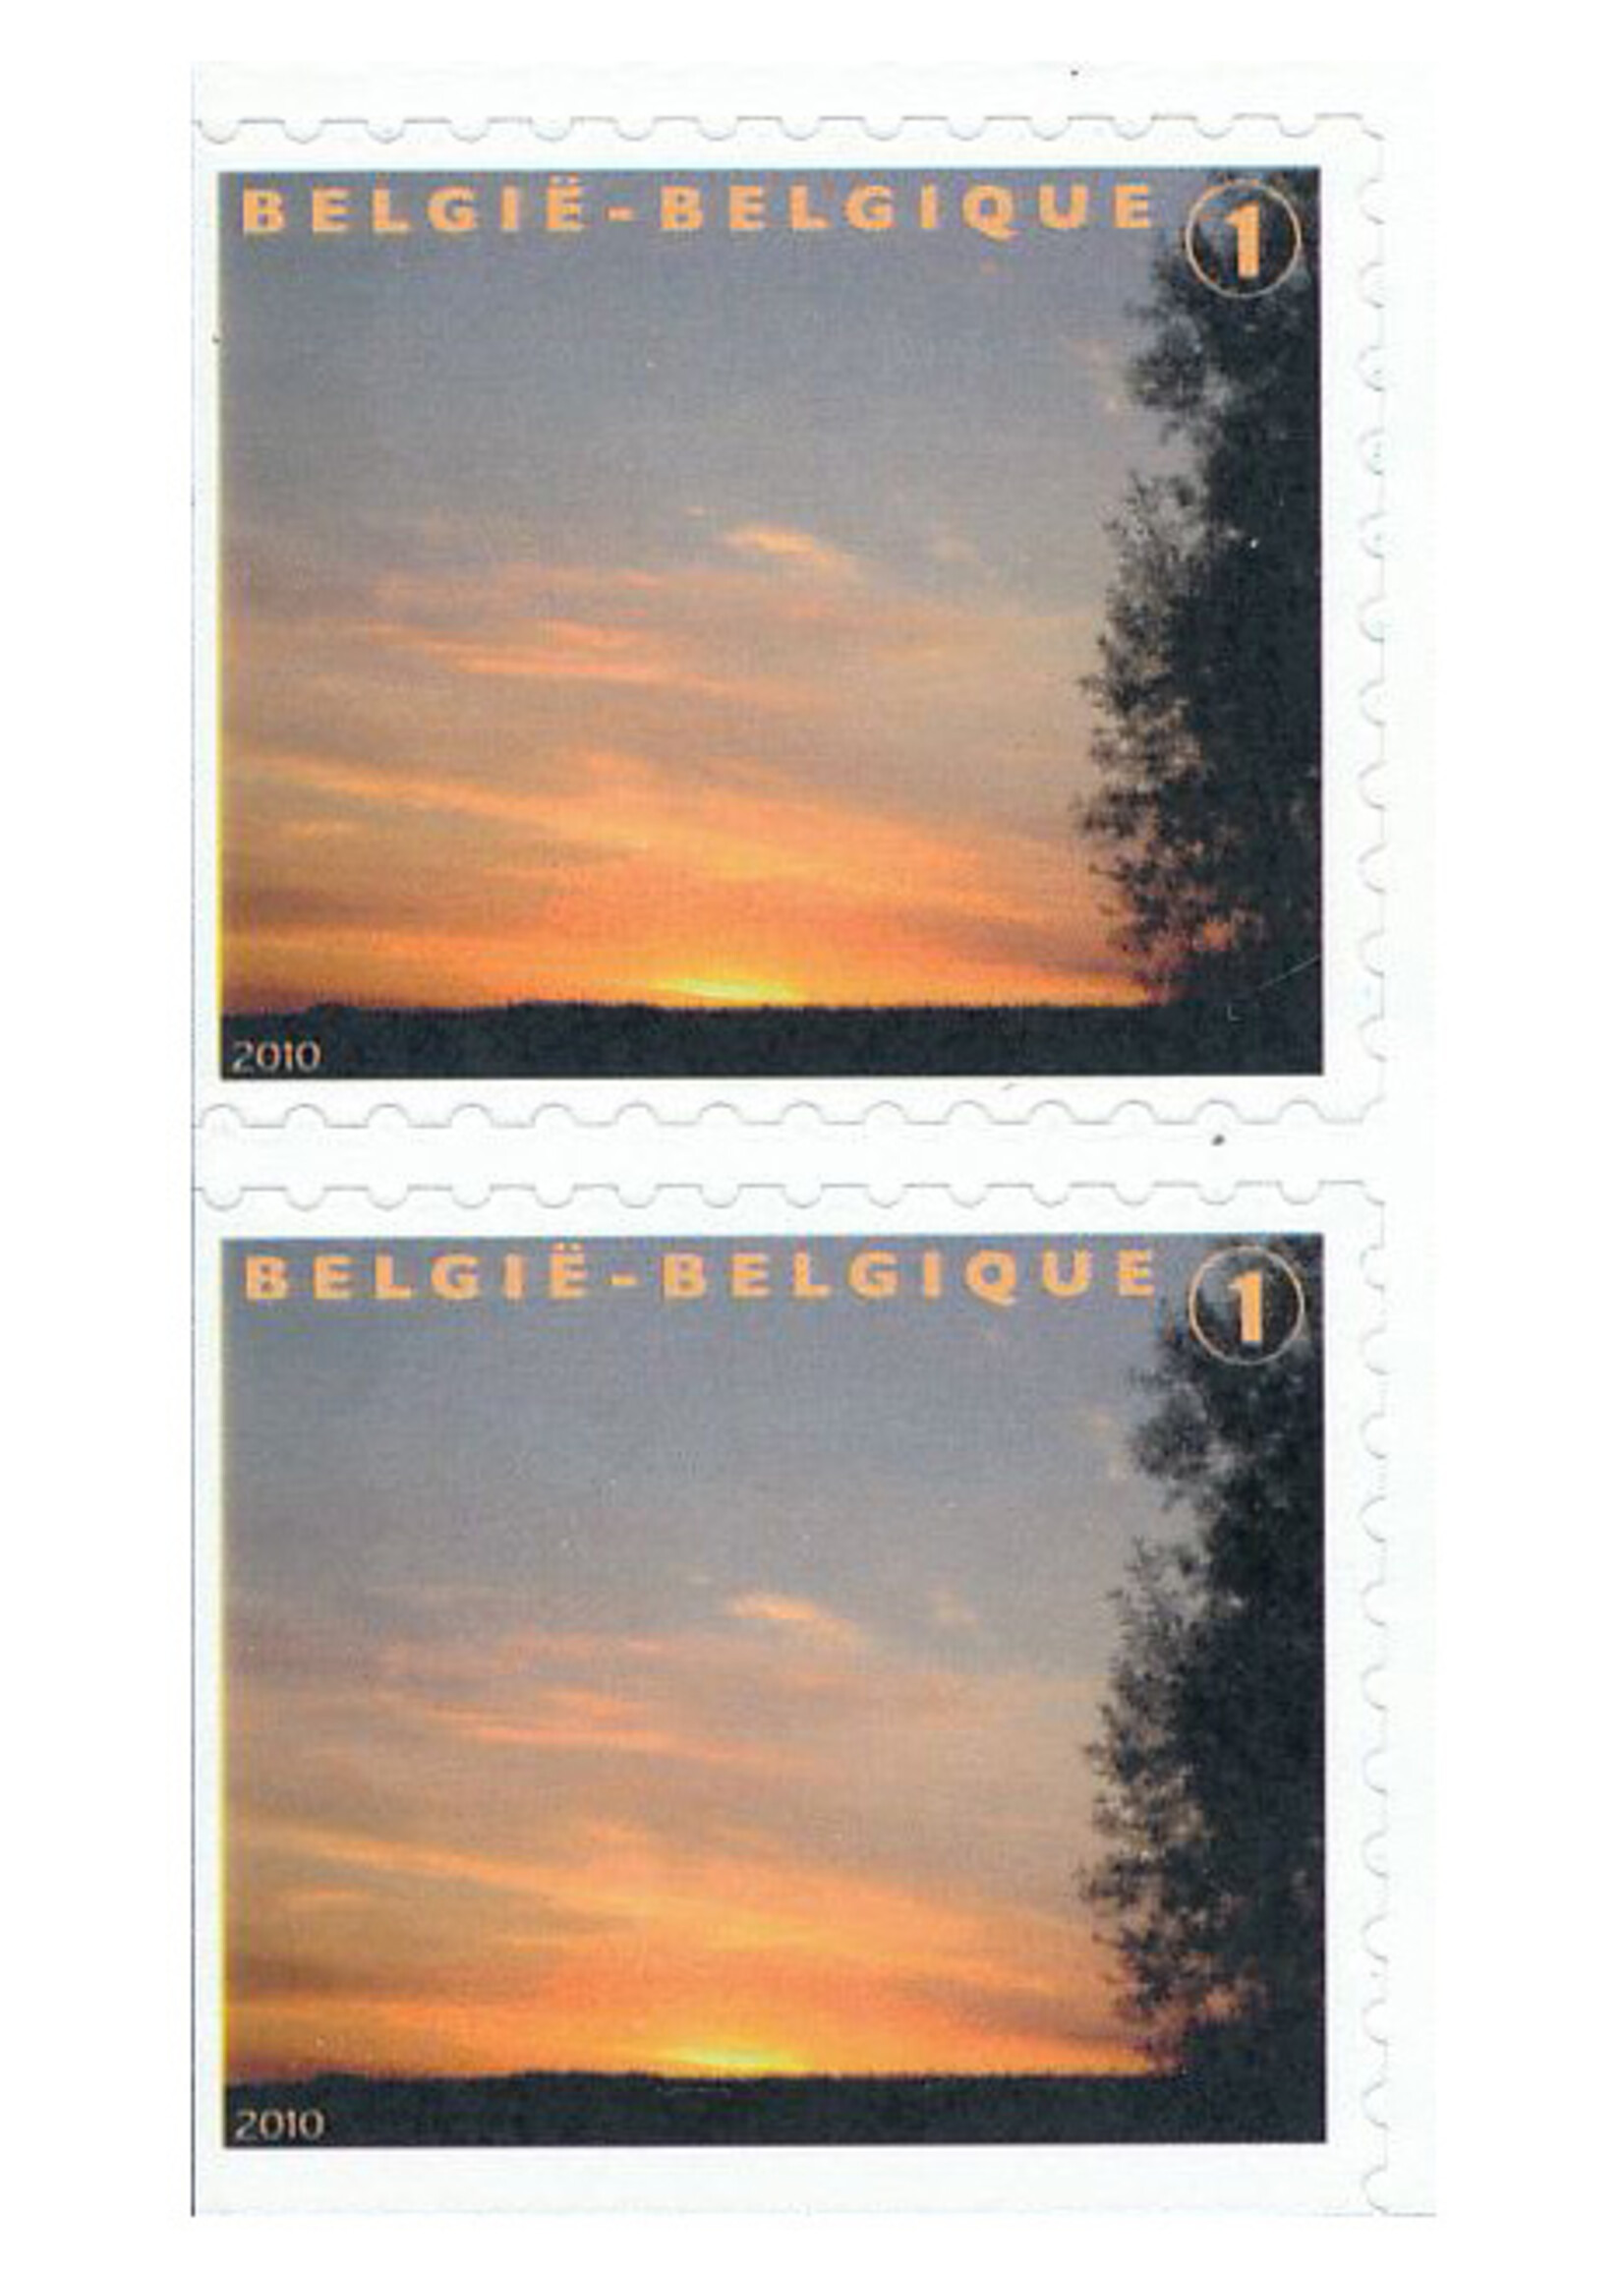 Theme Mourning - Booklet with 10 self-adhesive stamps - Rate 1, Belgium